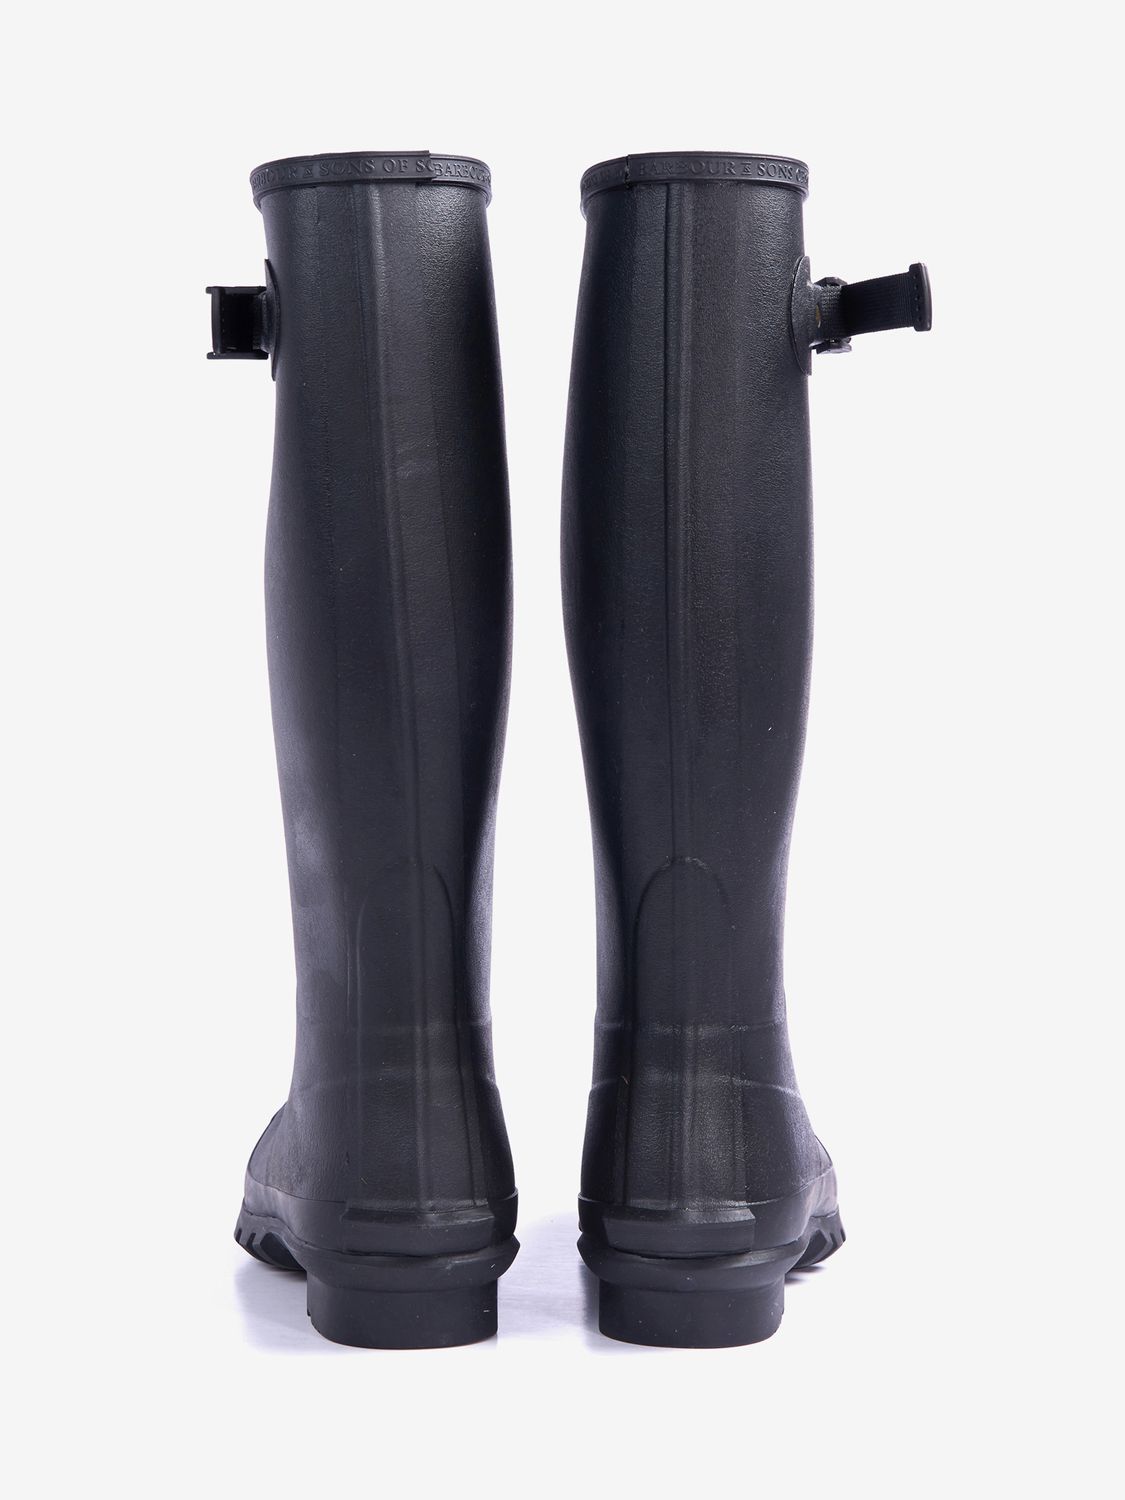 womens barbour wellies sale